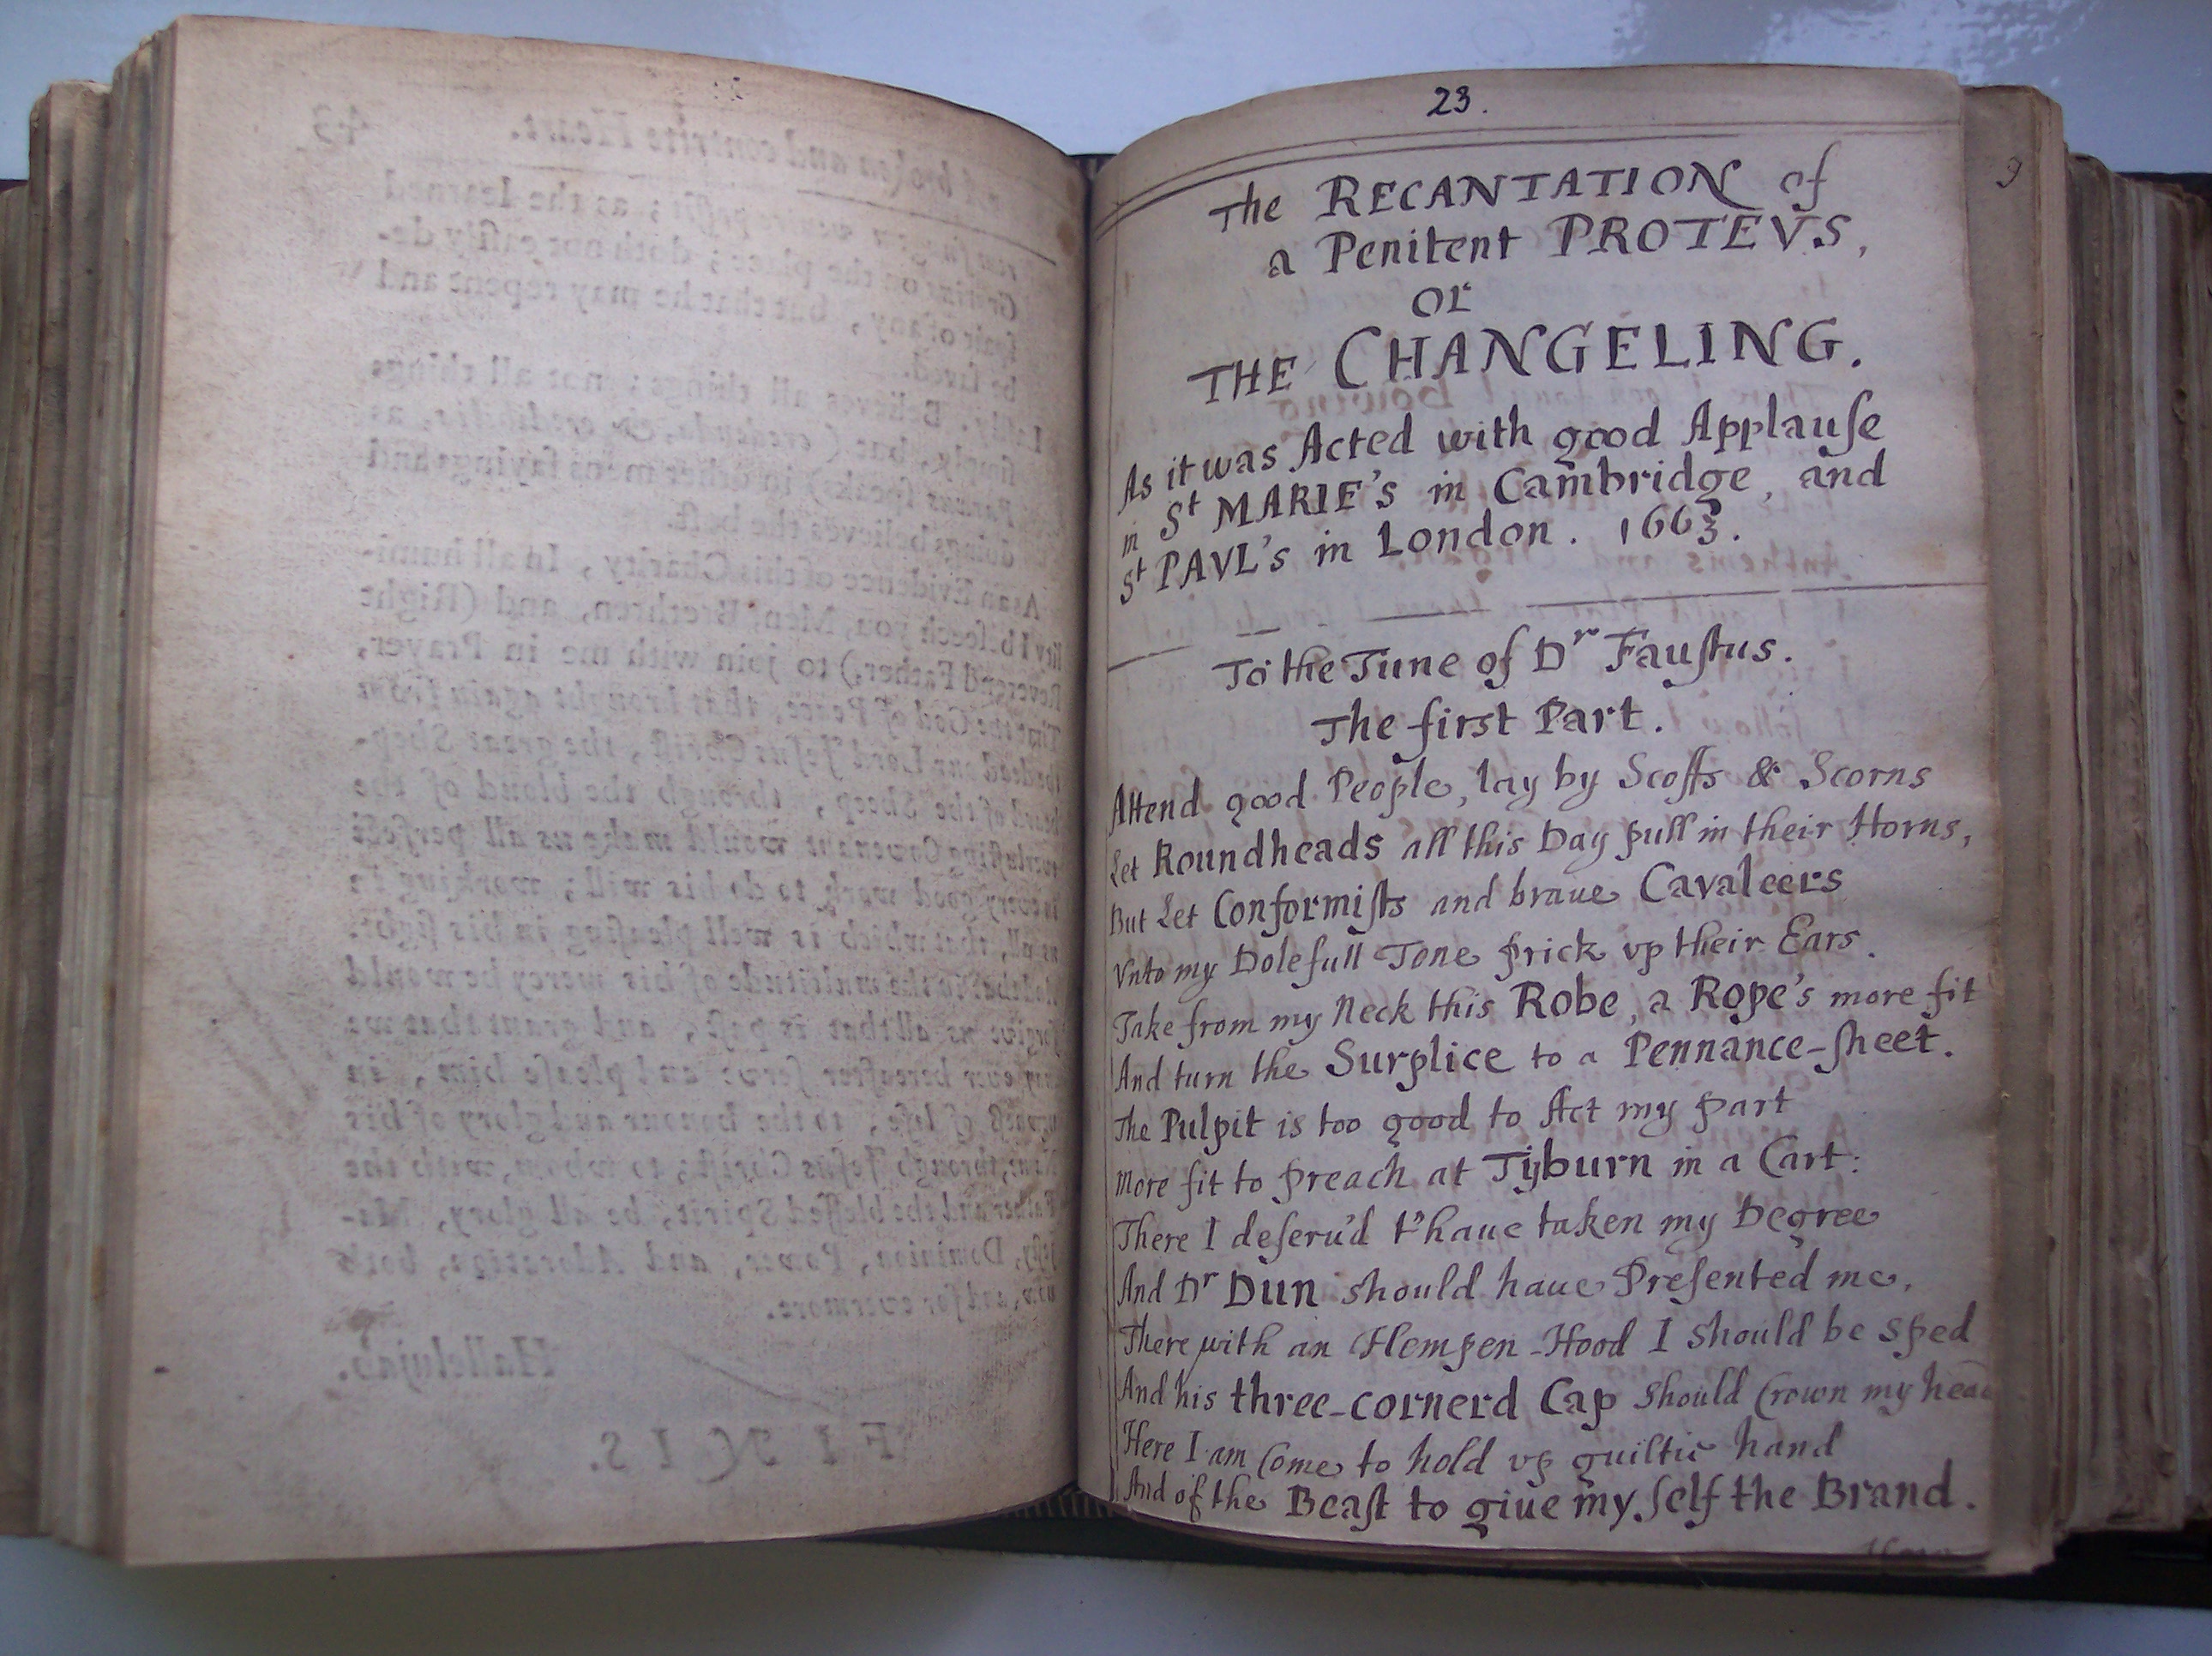 BT3.63.9(23) Robert Wild’s The recantation of a penitent Proteus (1663) (manuscript bound with 38 printed works; printed versions of this appeared also in 1663)